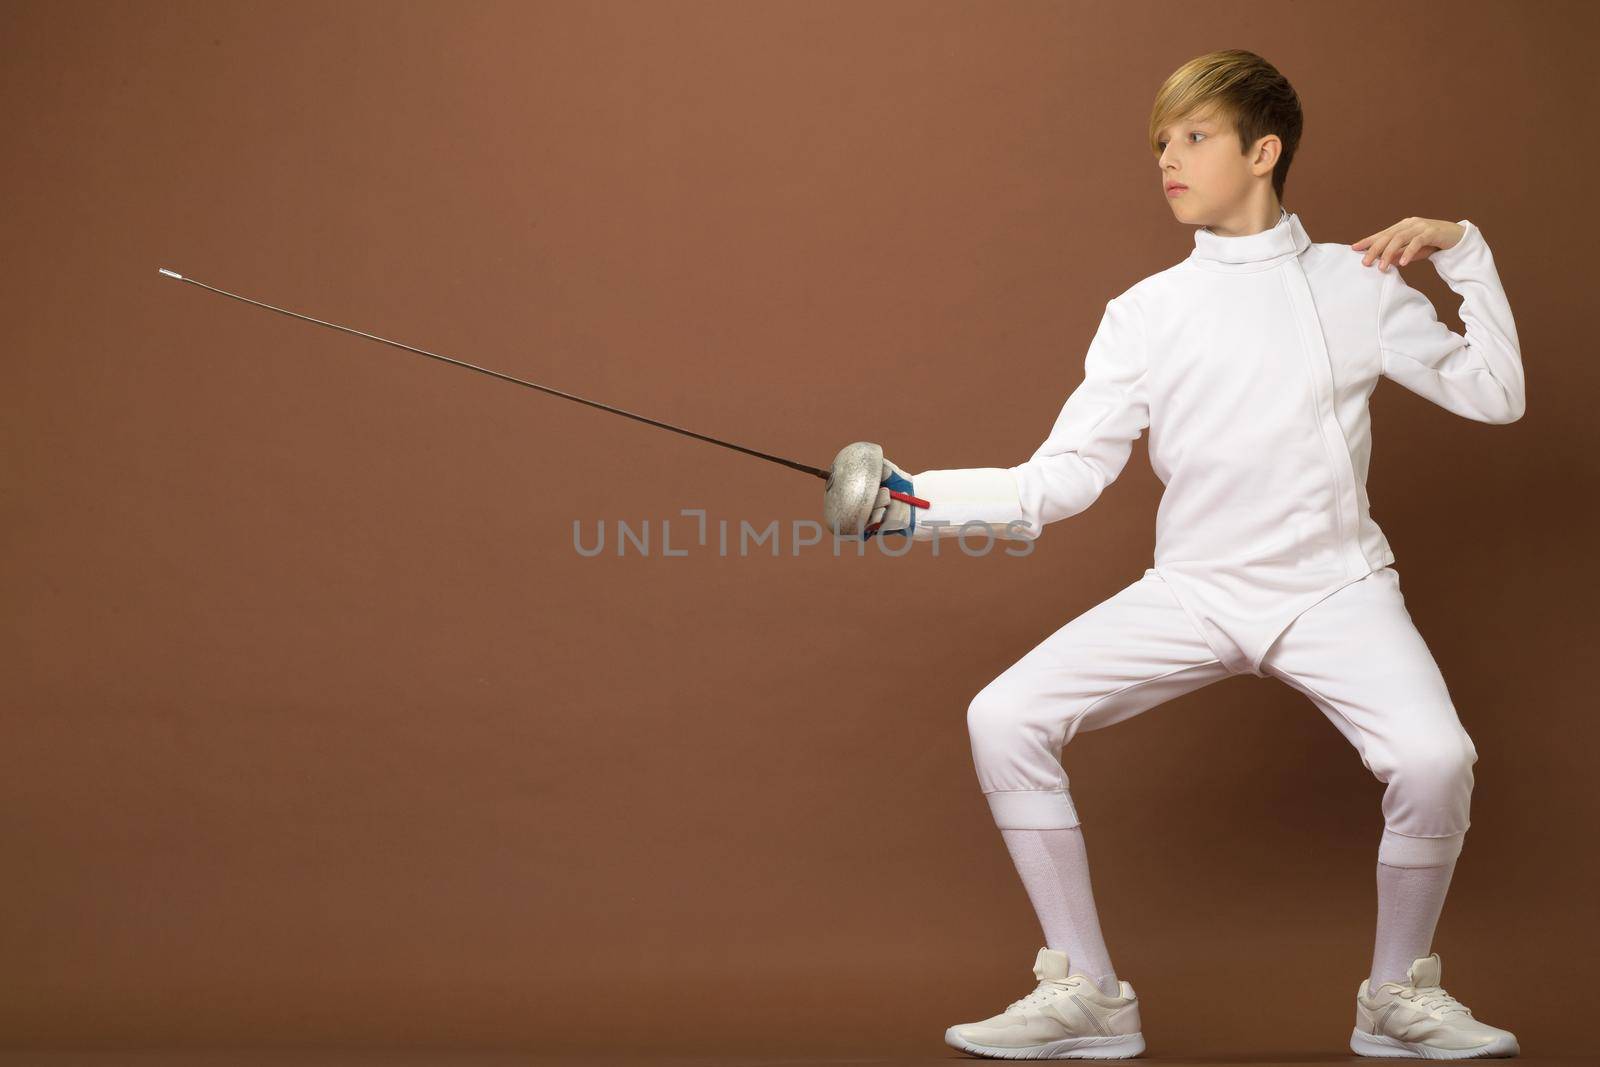 Boy fencer standing in attacking pose. Portrait of teenage boy wearing white fencing suit posing with sabre against brown background. Teenager taking part at foil fencing tournament